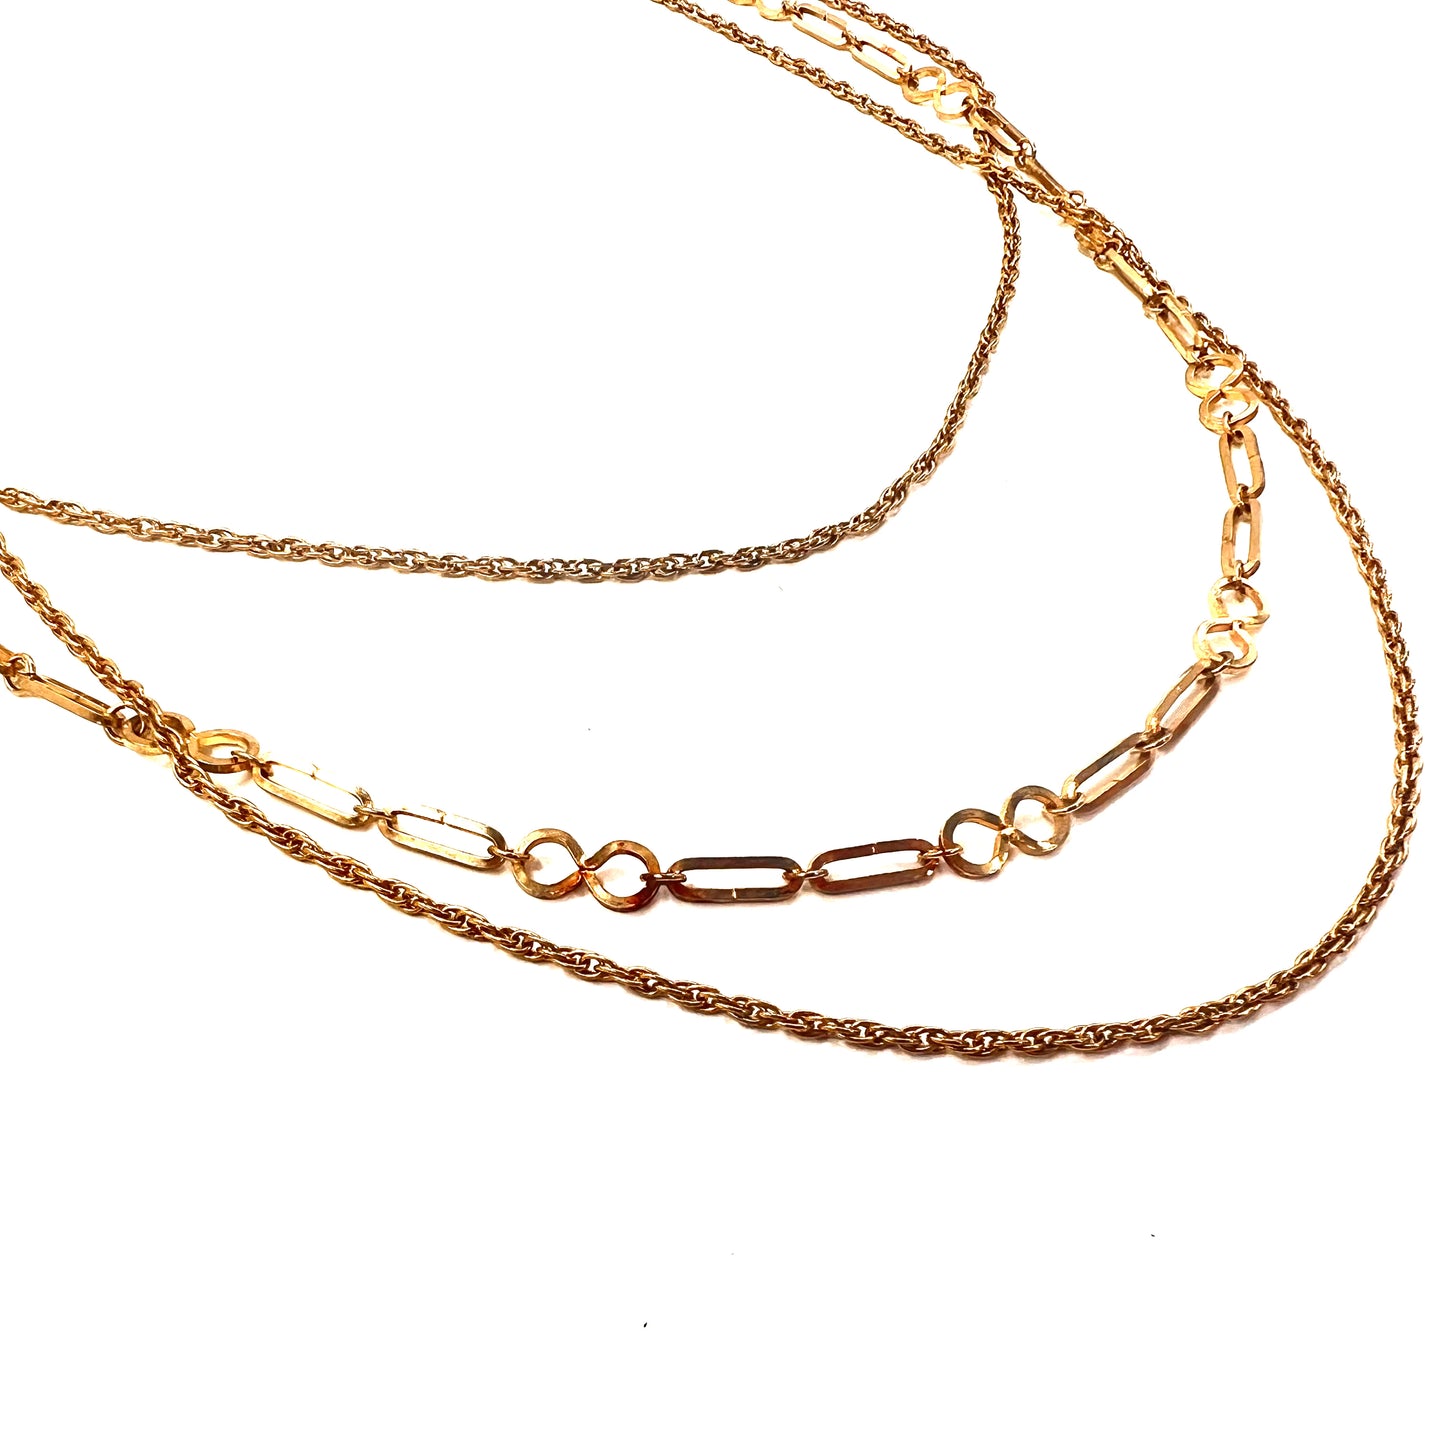 Vintage Gold Chain Necklaces 3連 ゴールドチェーン ネックレス 73cm